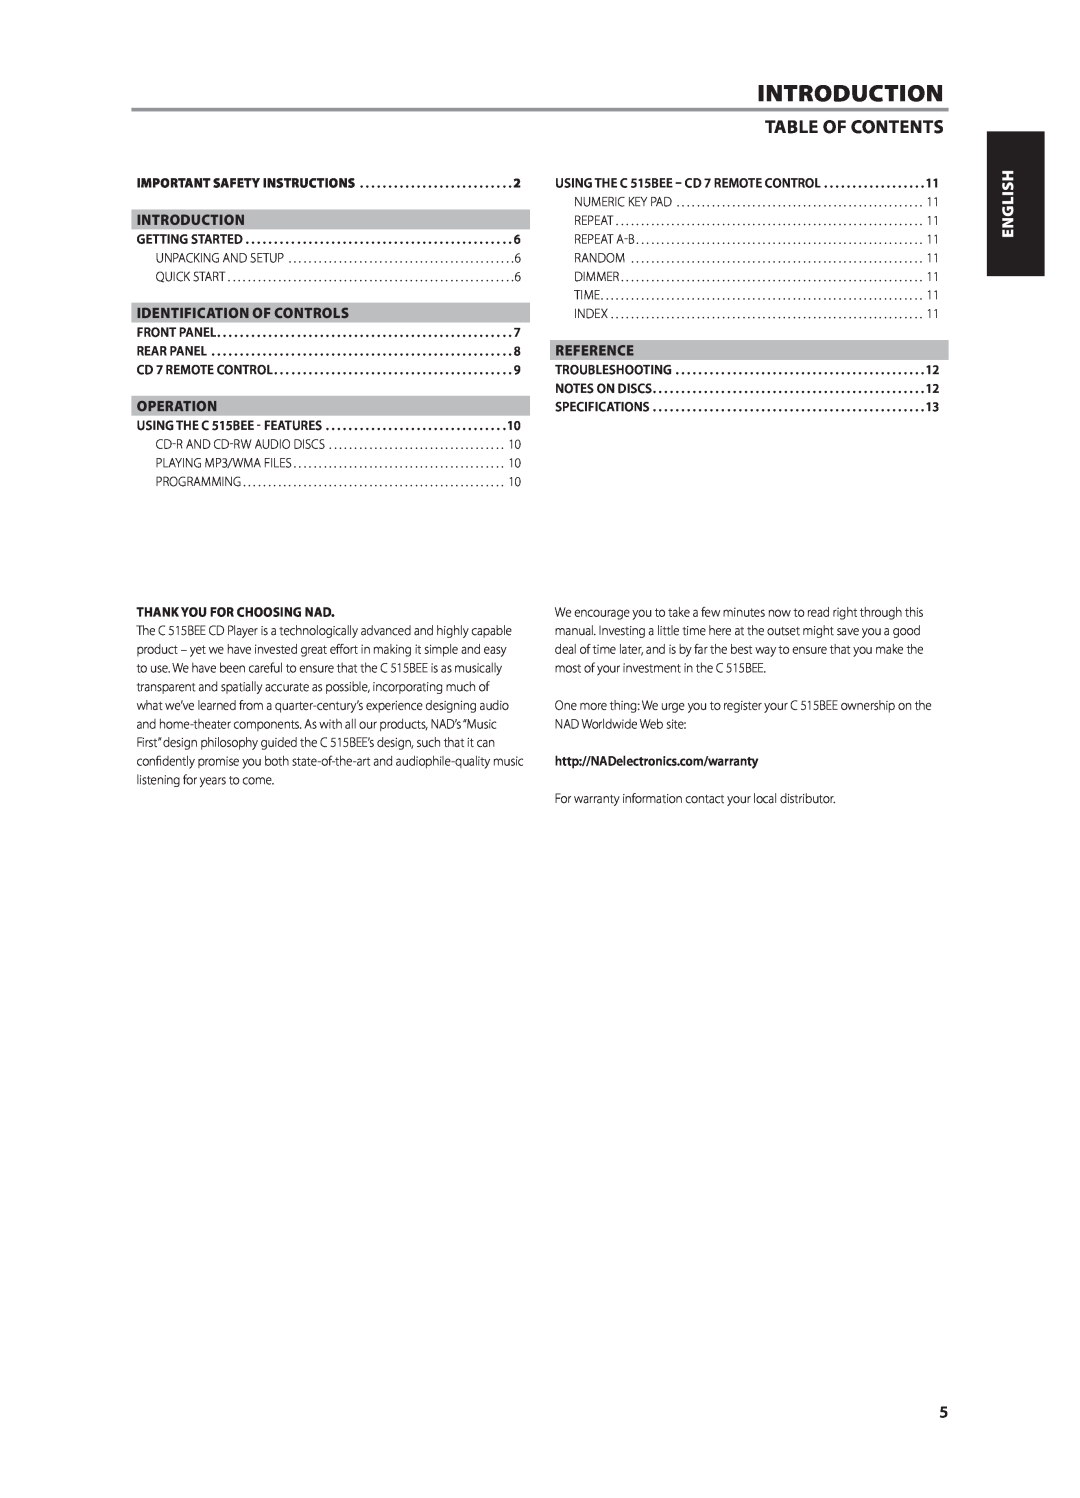 NAD C515BEE owner manual introduction, Table Of Contents, Identification Of Controls, Operation, Reference 